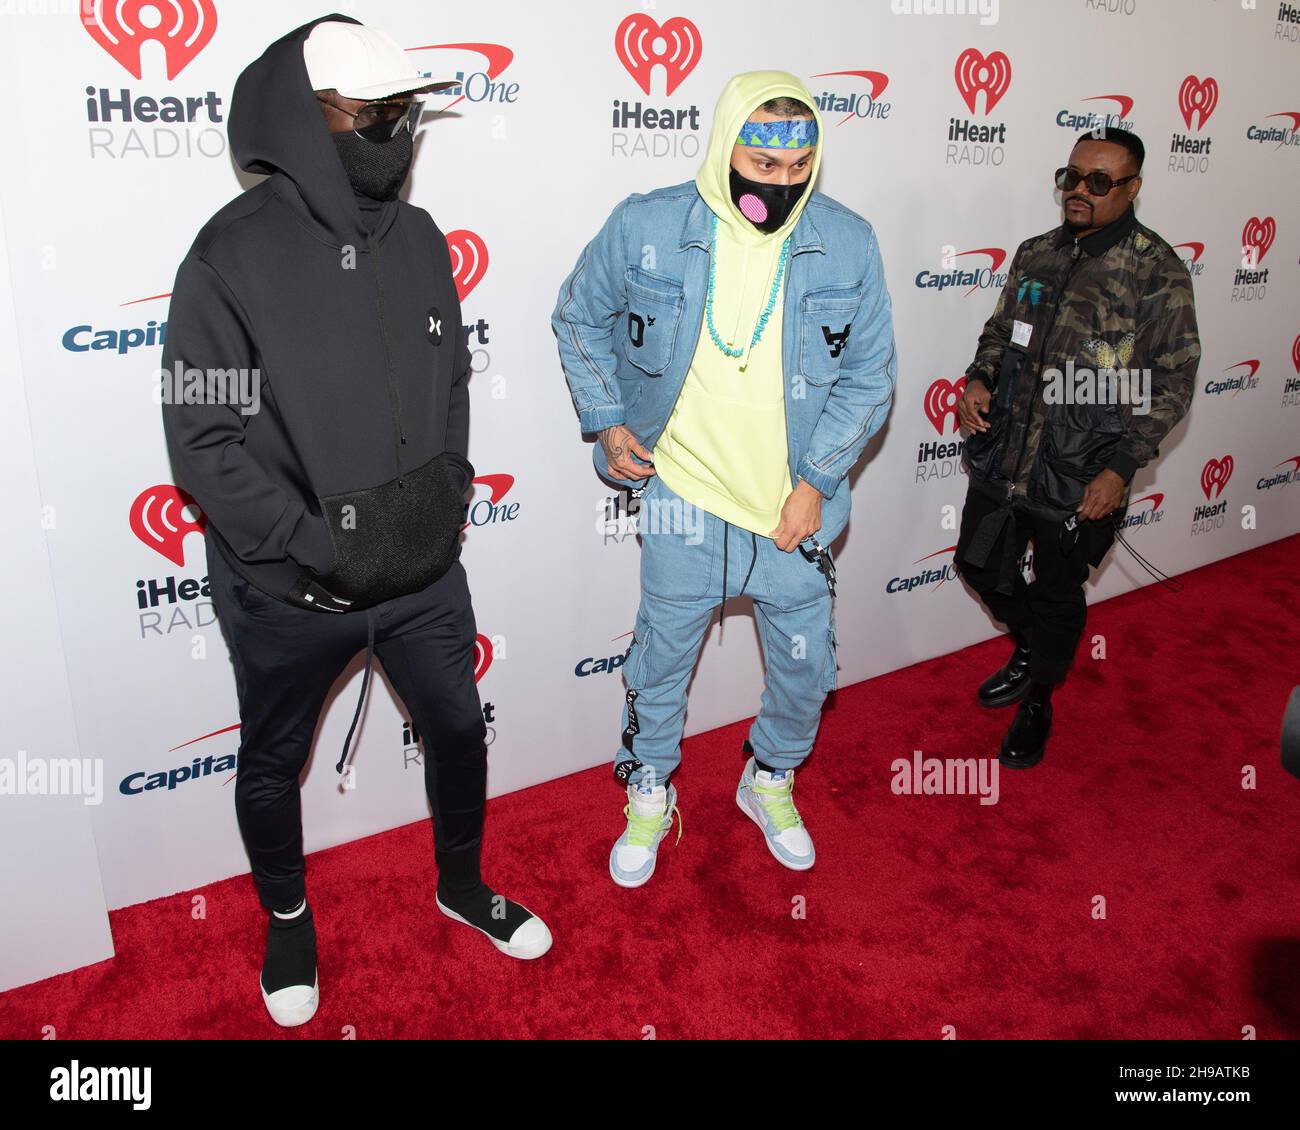 December 3, 2021, Los Angeles, California, USA: (L-R) will.i.am, Taboo, and apl.de.ap of Black Eyed Peas attend iHeartRadio 102.7 KIIS FM Jingle Ball. (Credit Image: © Billy Bennight/ZUMA Press Wire) Stock Photo